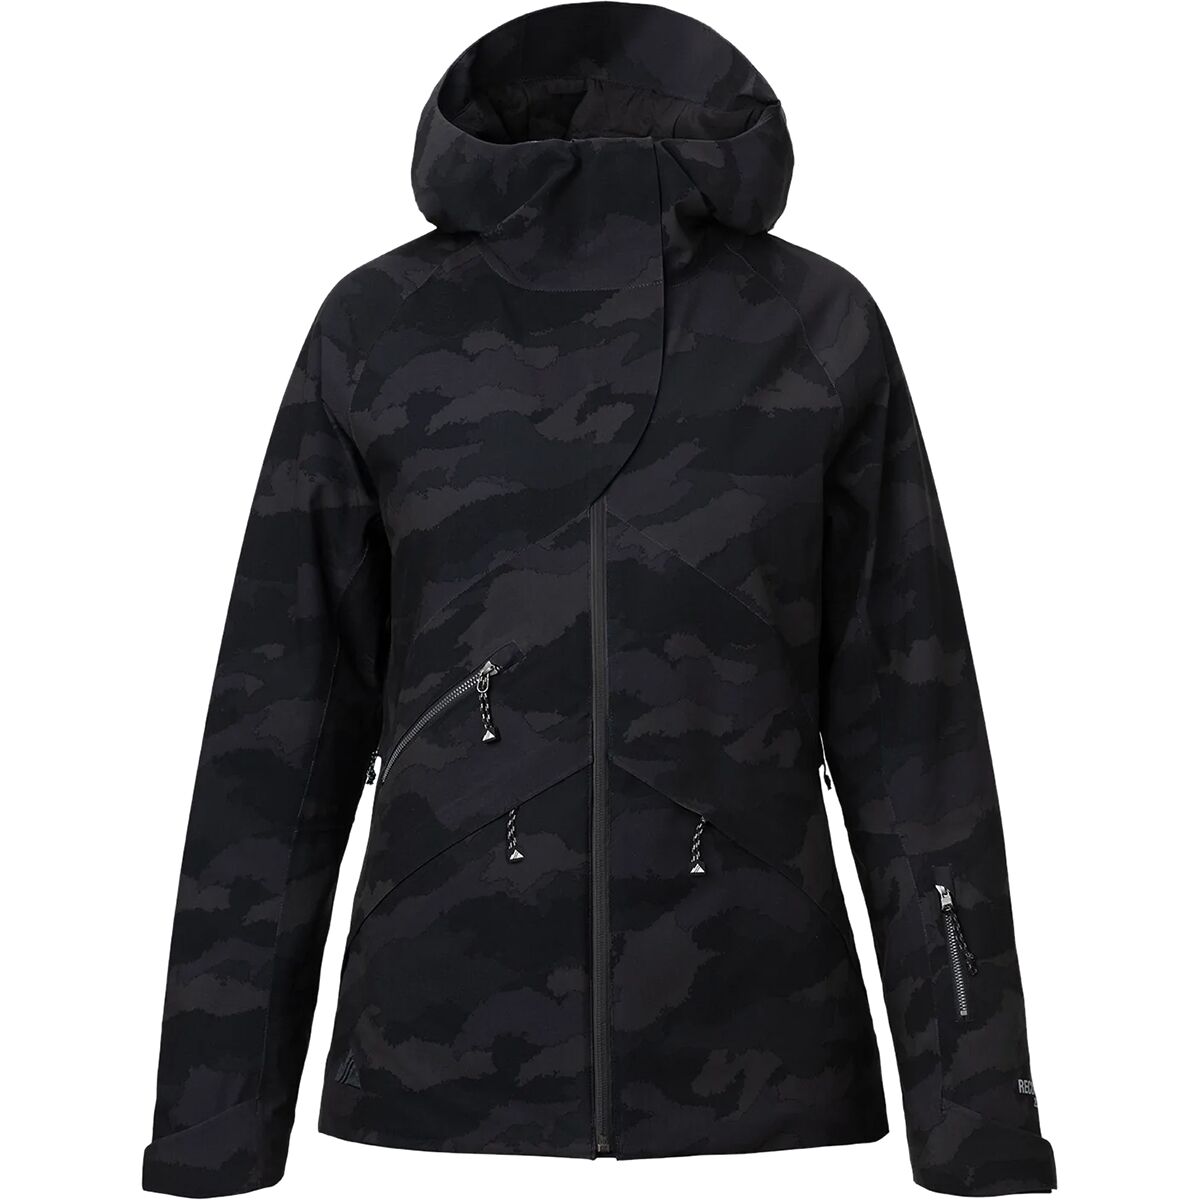 Strafe Outerwear Lucky Jacket - Women's Stealth Camo